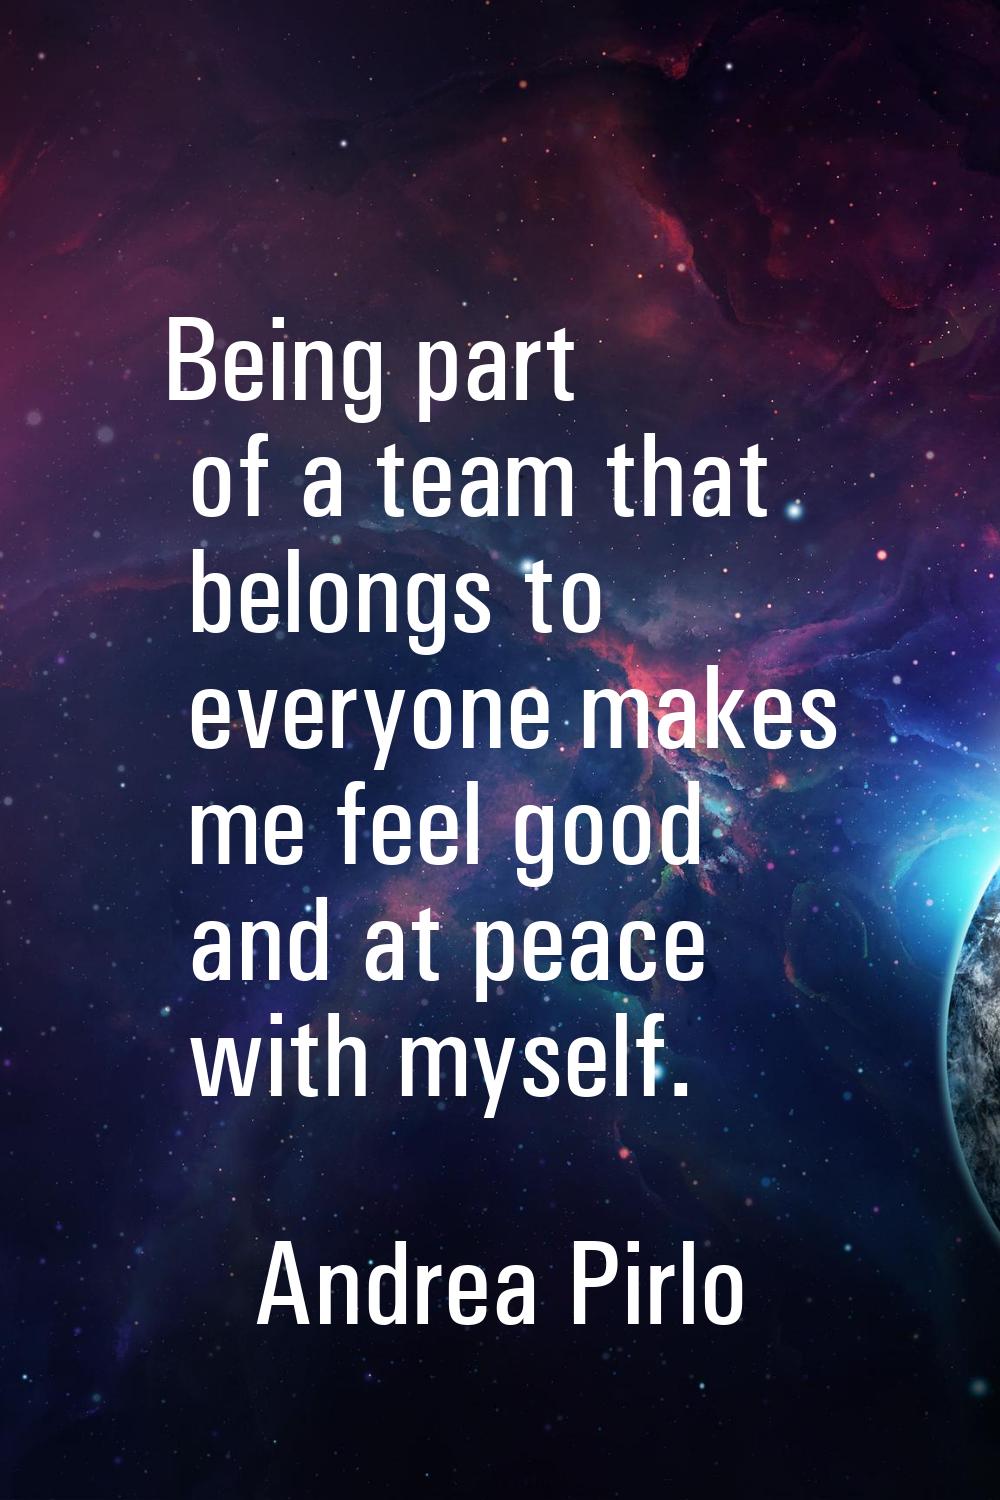 Being part of a team that belongs to everyone makes me feel good and at peace with myself.